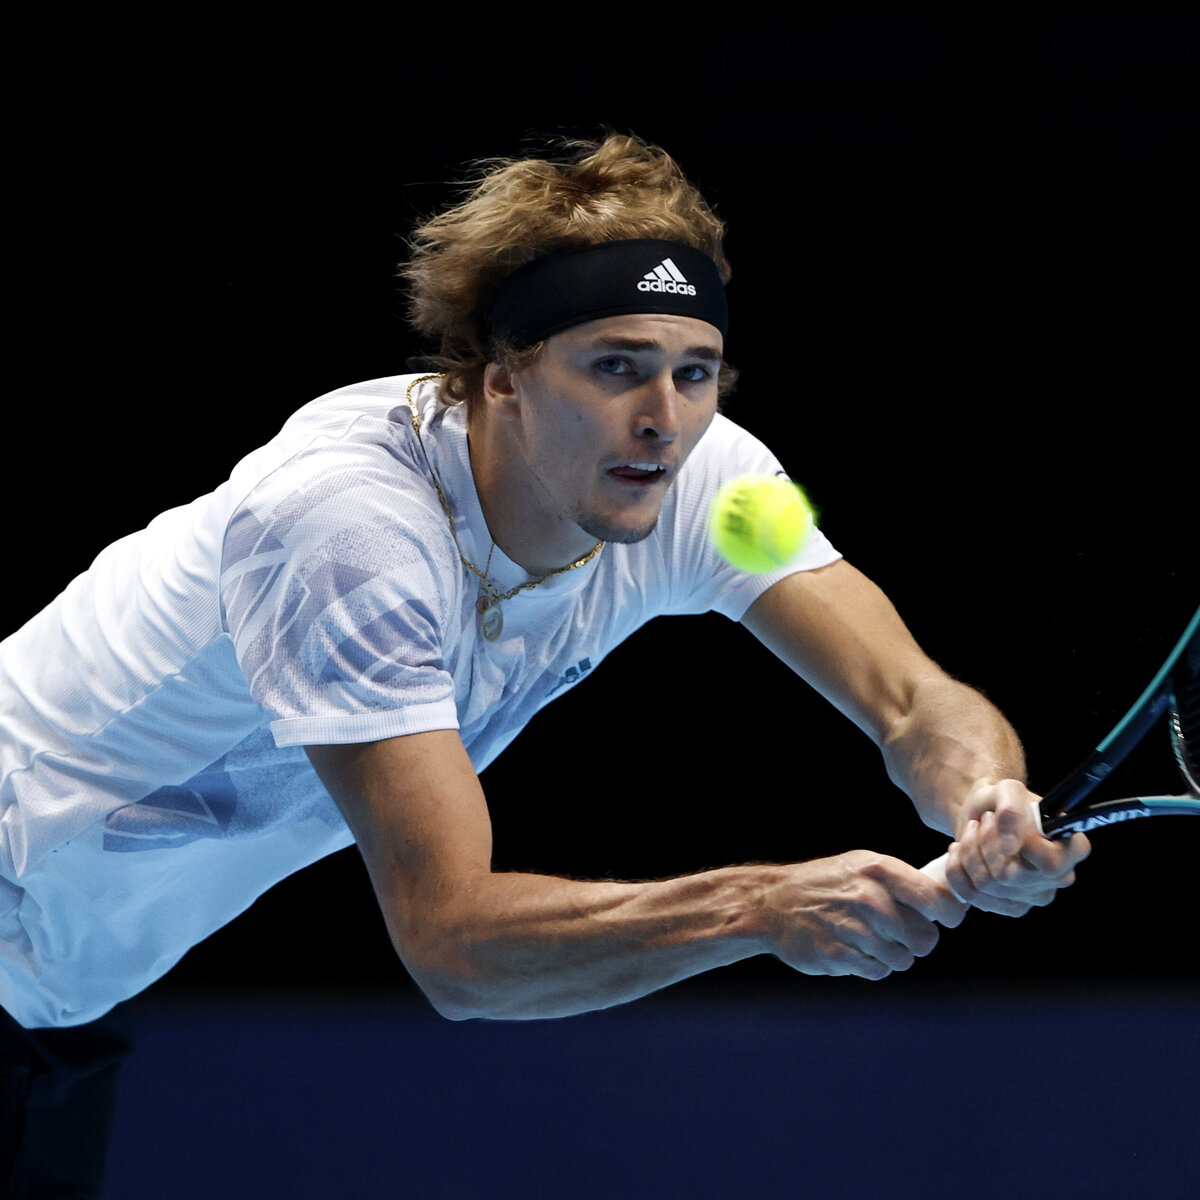 Alexander Zverev At The Atp Finals Torn Performance In A Difficult Time Tennis 